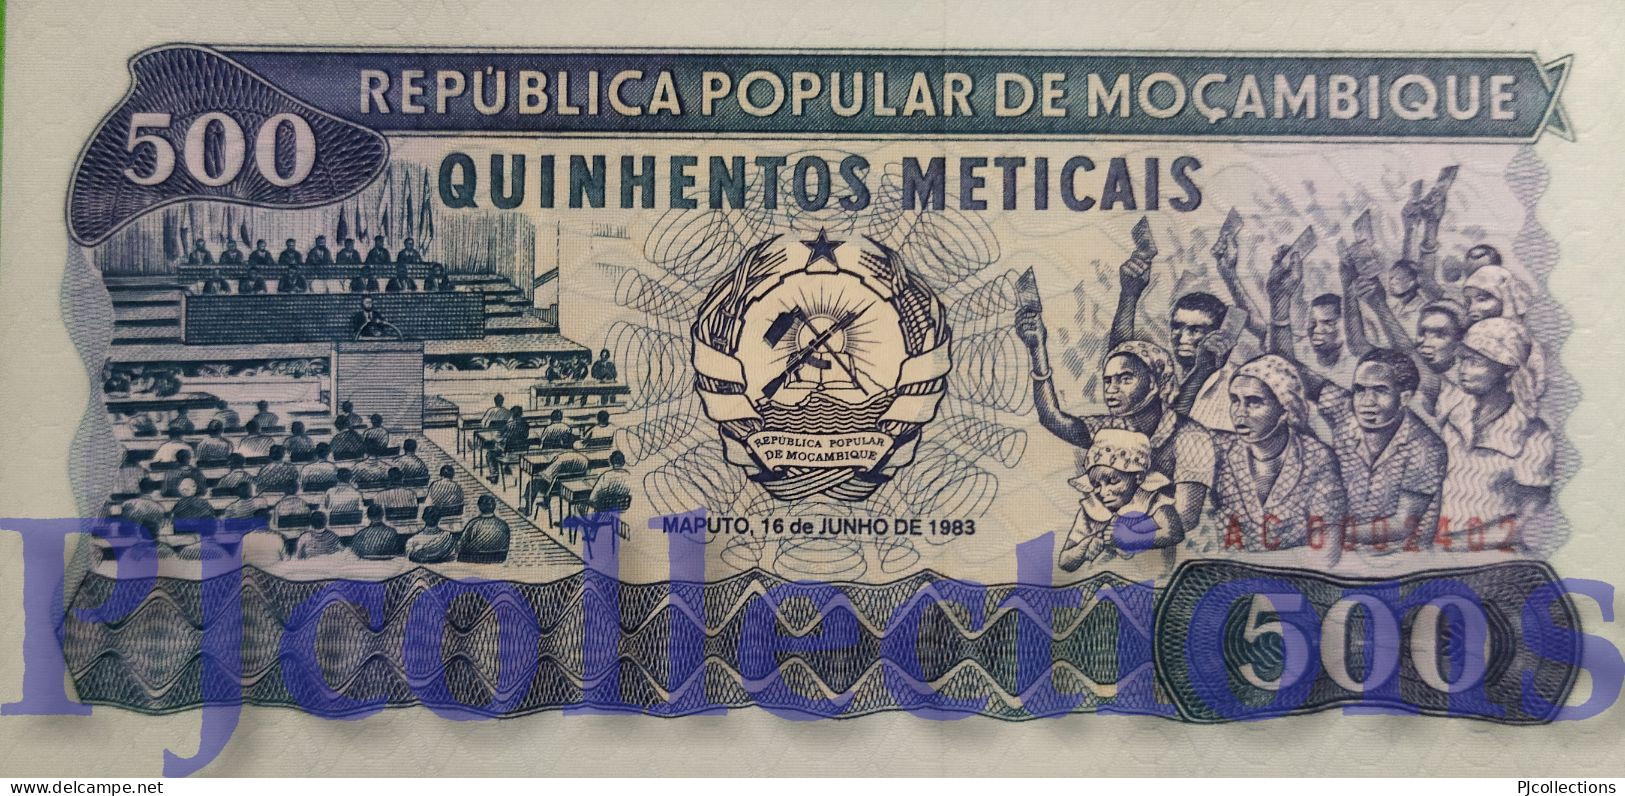 MOZAMBIQUE 500 ESCUDOS 1983 PICK 131a UNC LOW SERIAL NUMBER "AC0002402" - Mozambico